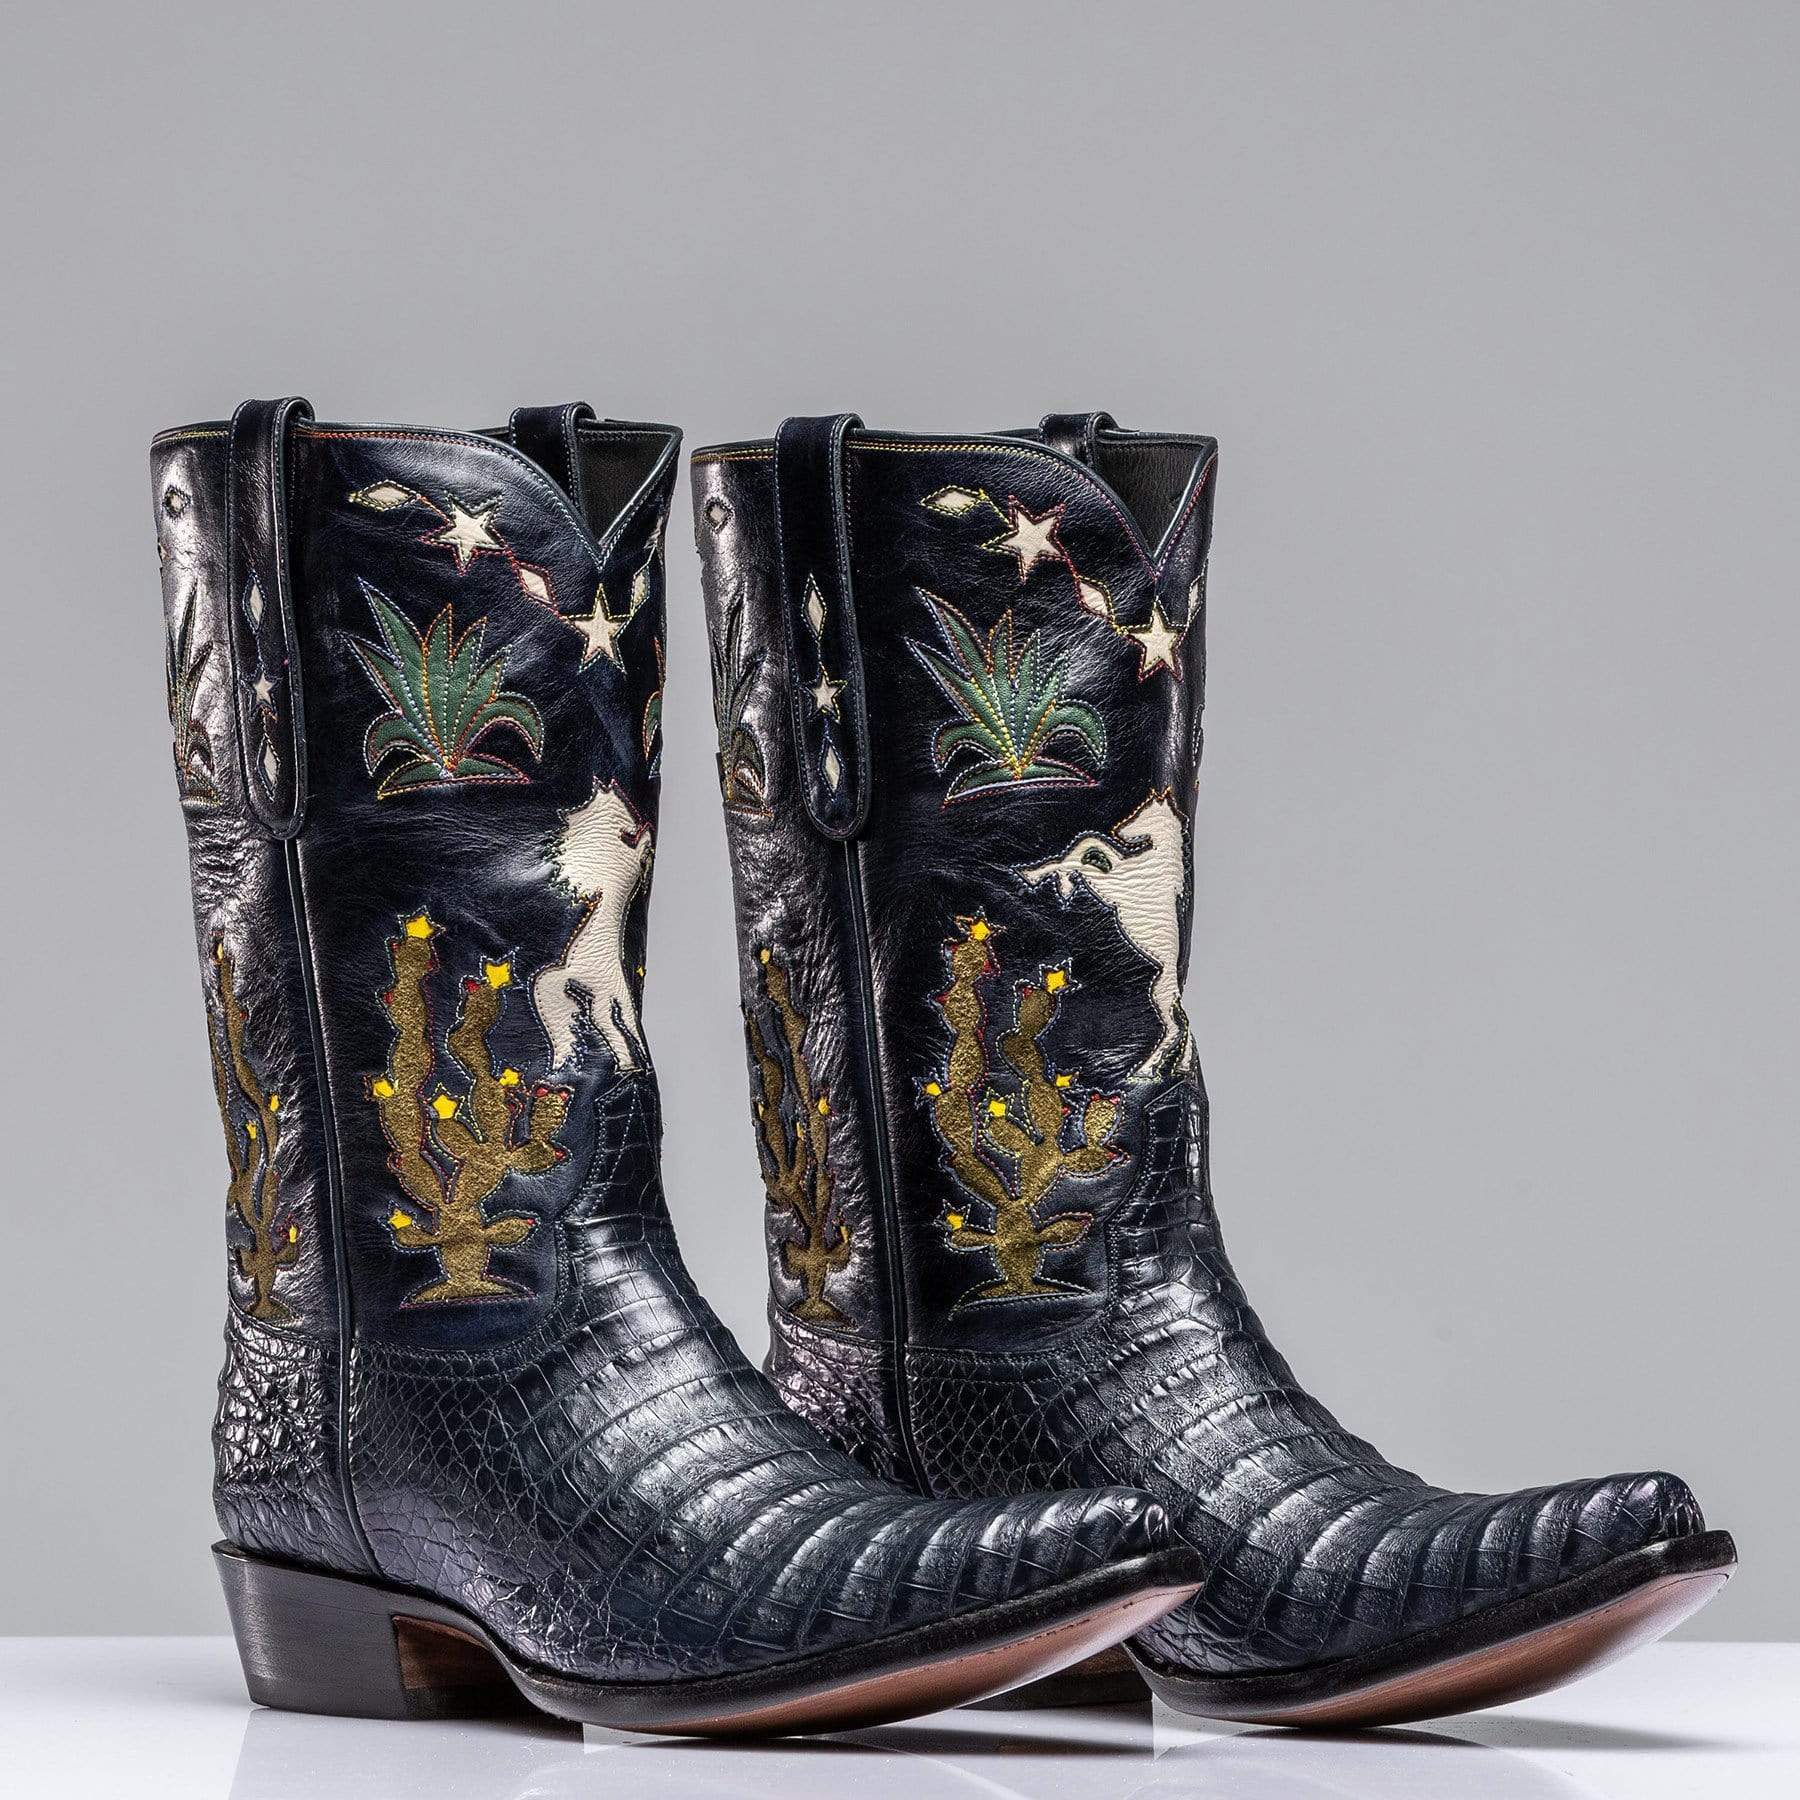 stallion-boots-inlayed-western-boots-mens-cowboy-boots-axels-vail-29914962788541_1800x1800.jpg